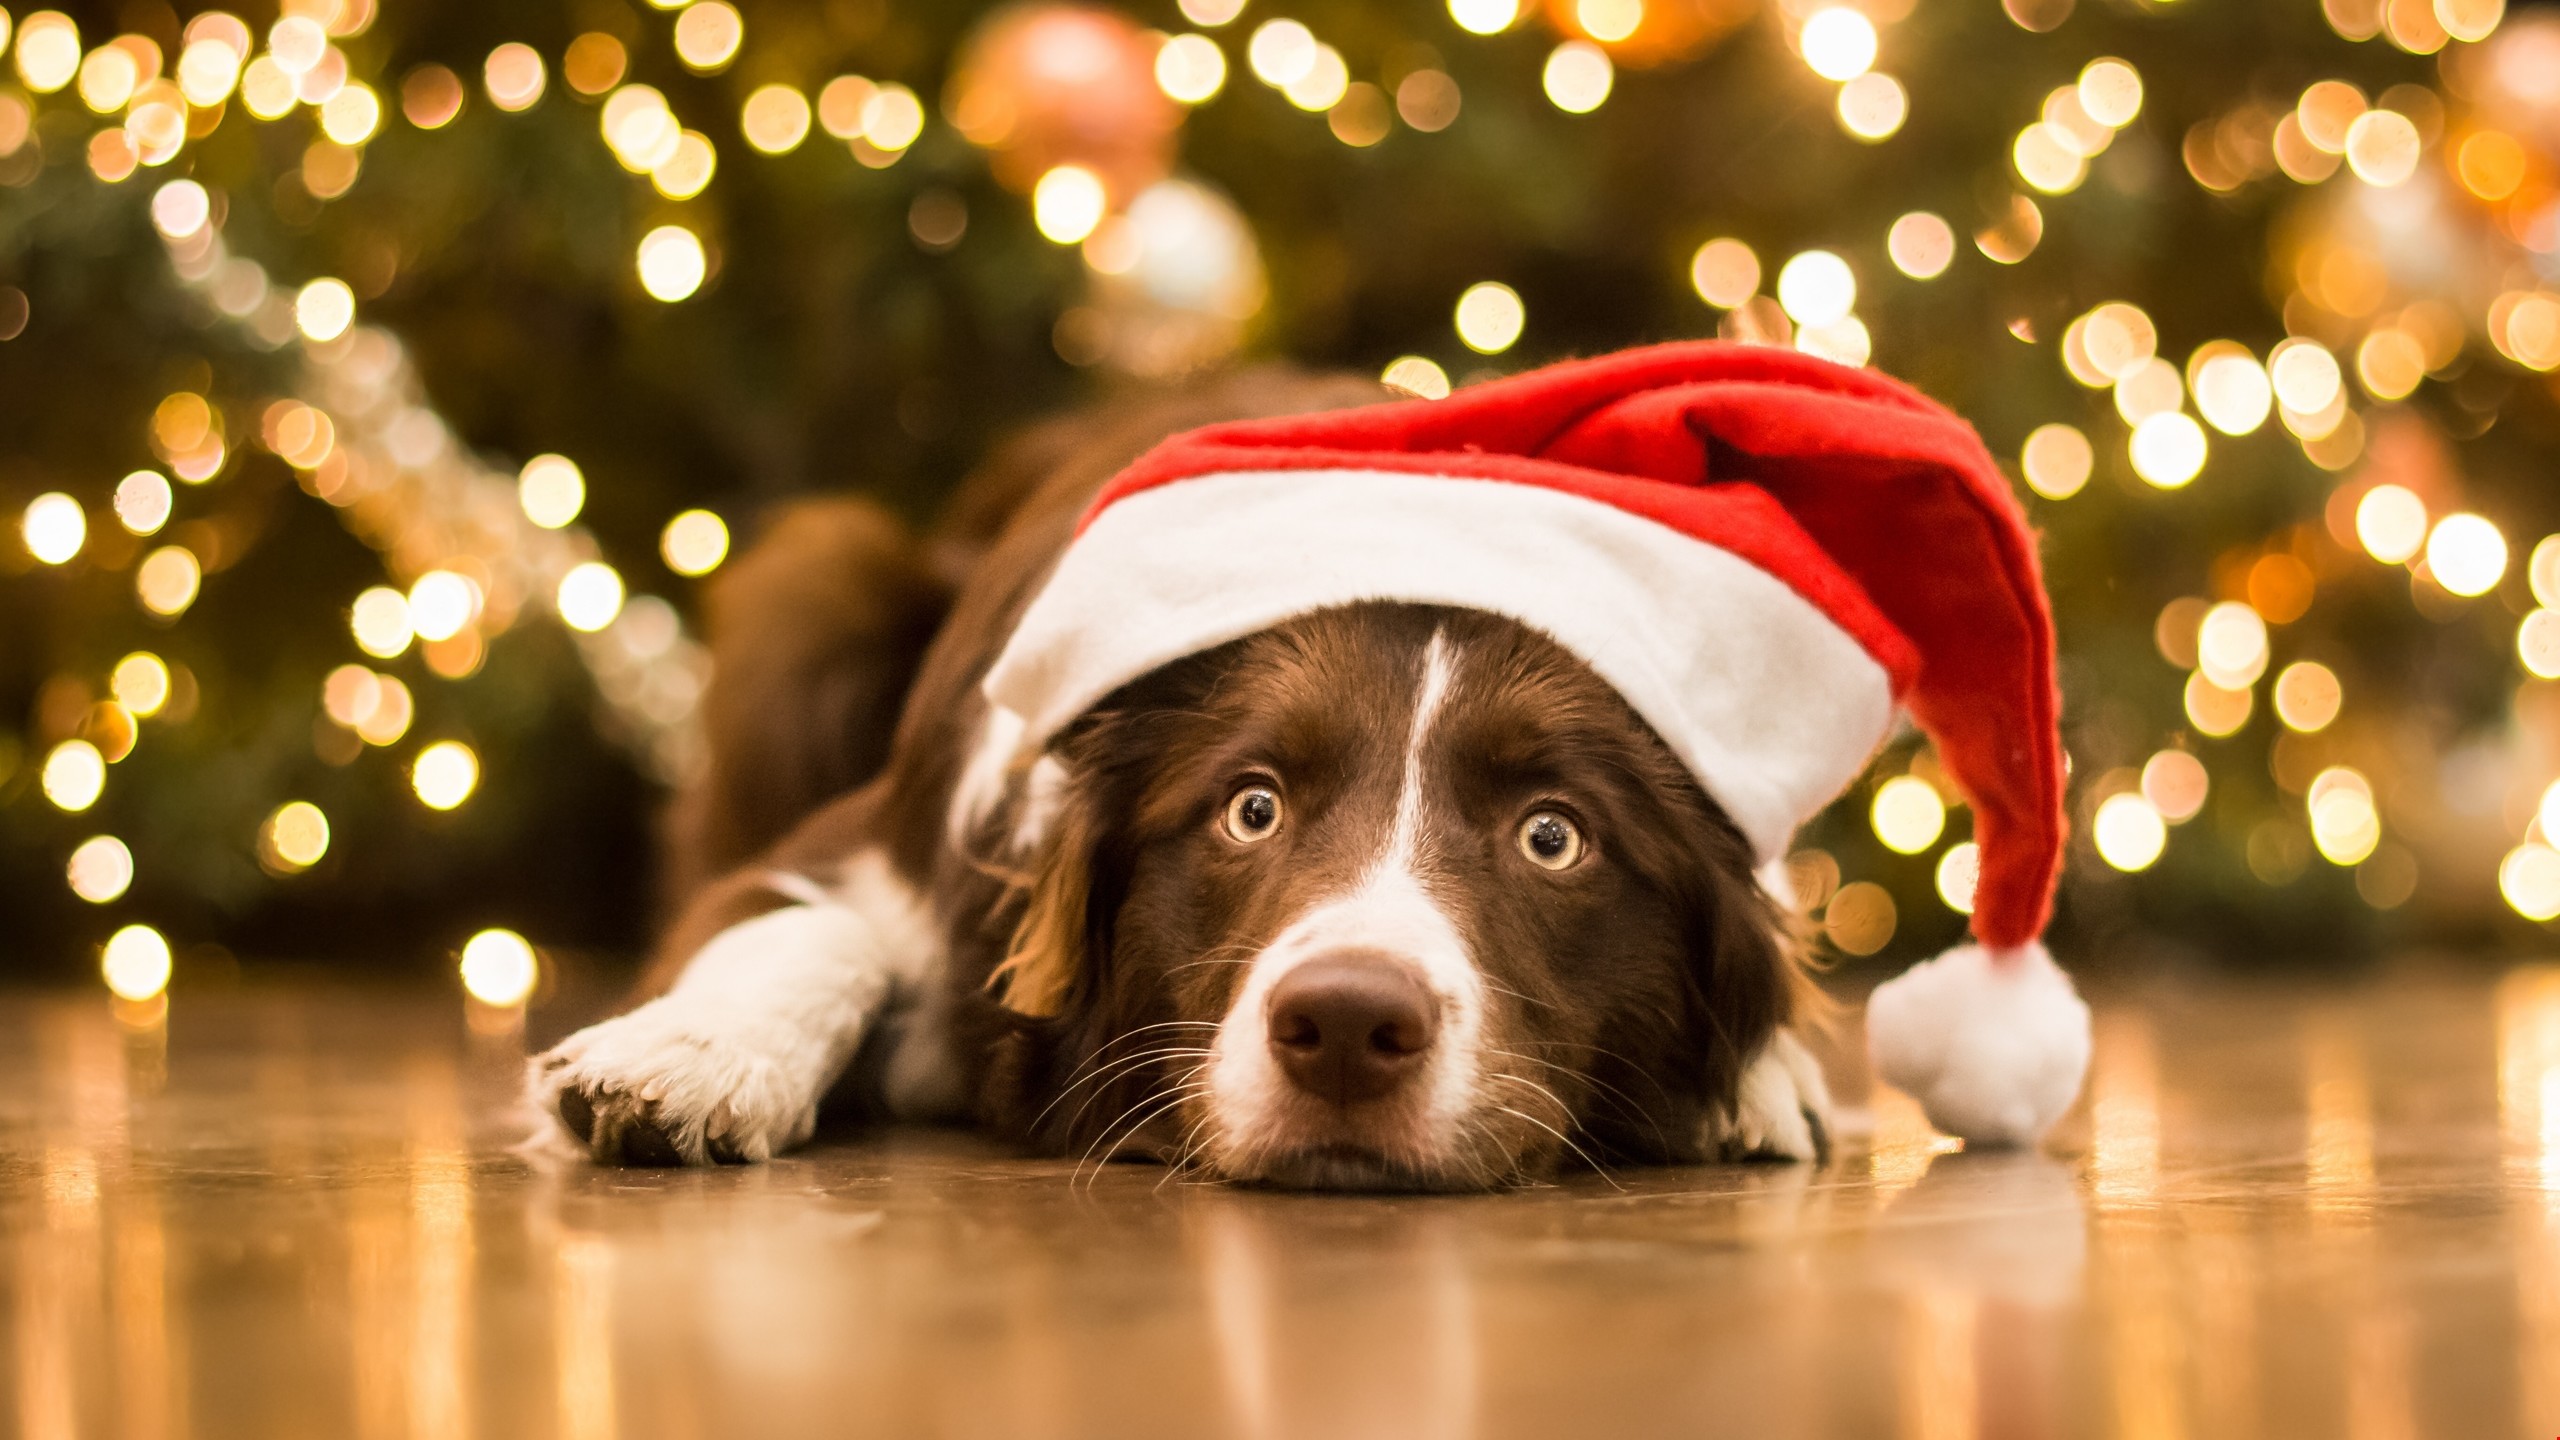 2560x1440, Download Christmas, New Year, Dog, Cute - Christmas Dog Backgrounds - HD Wallpaper 